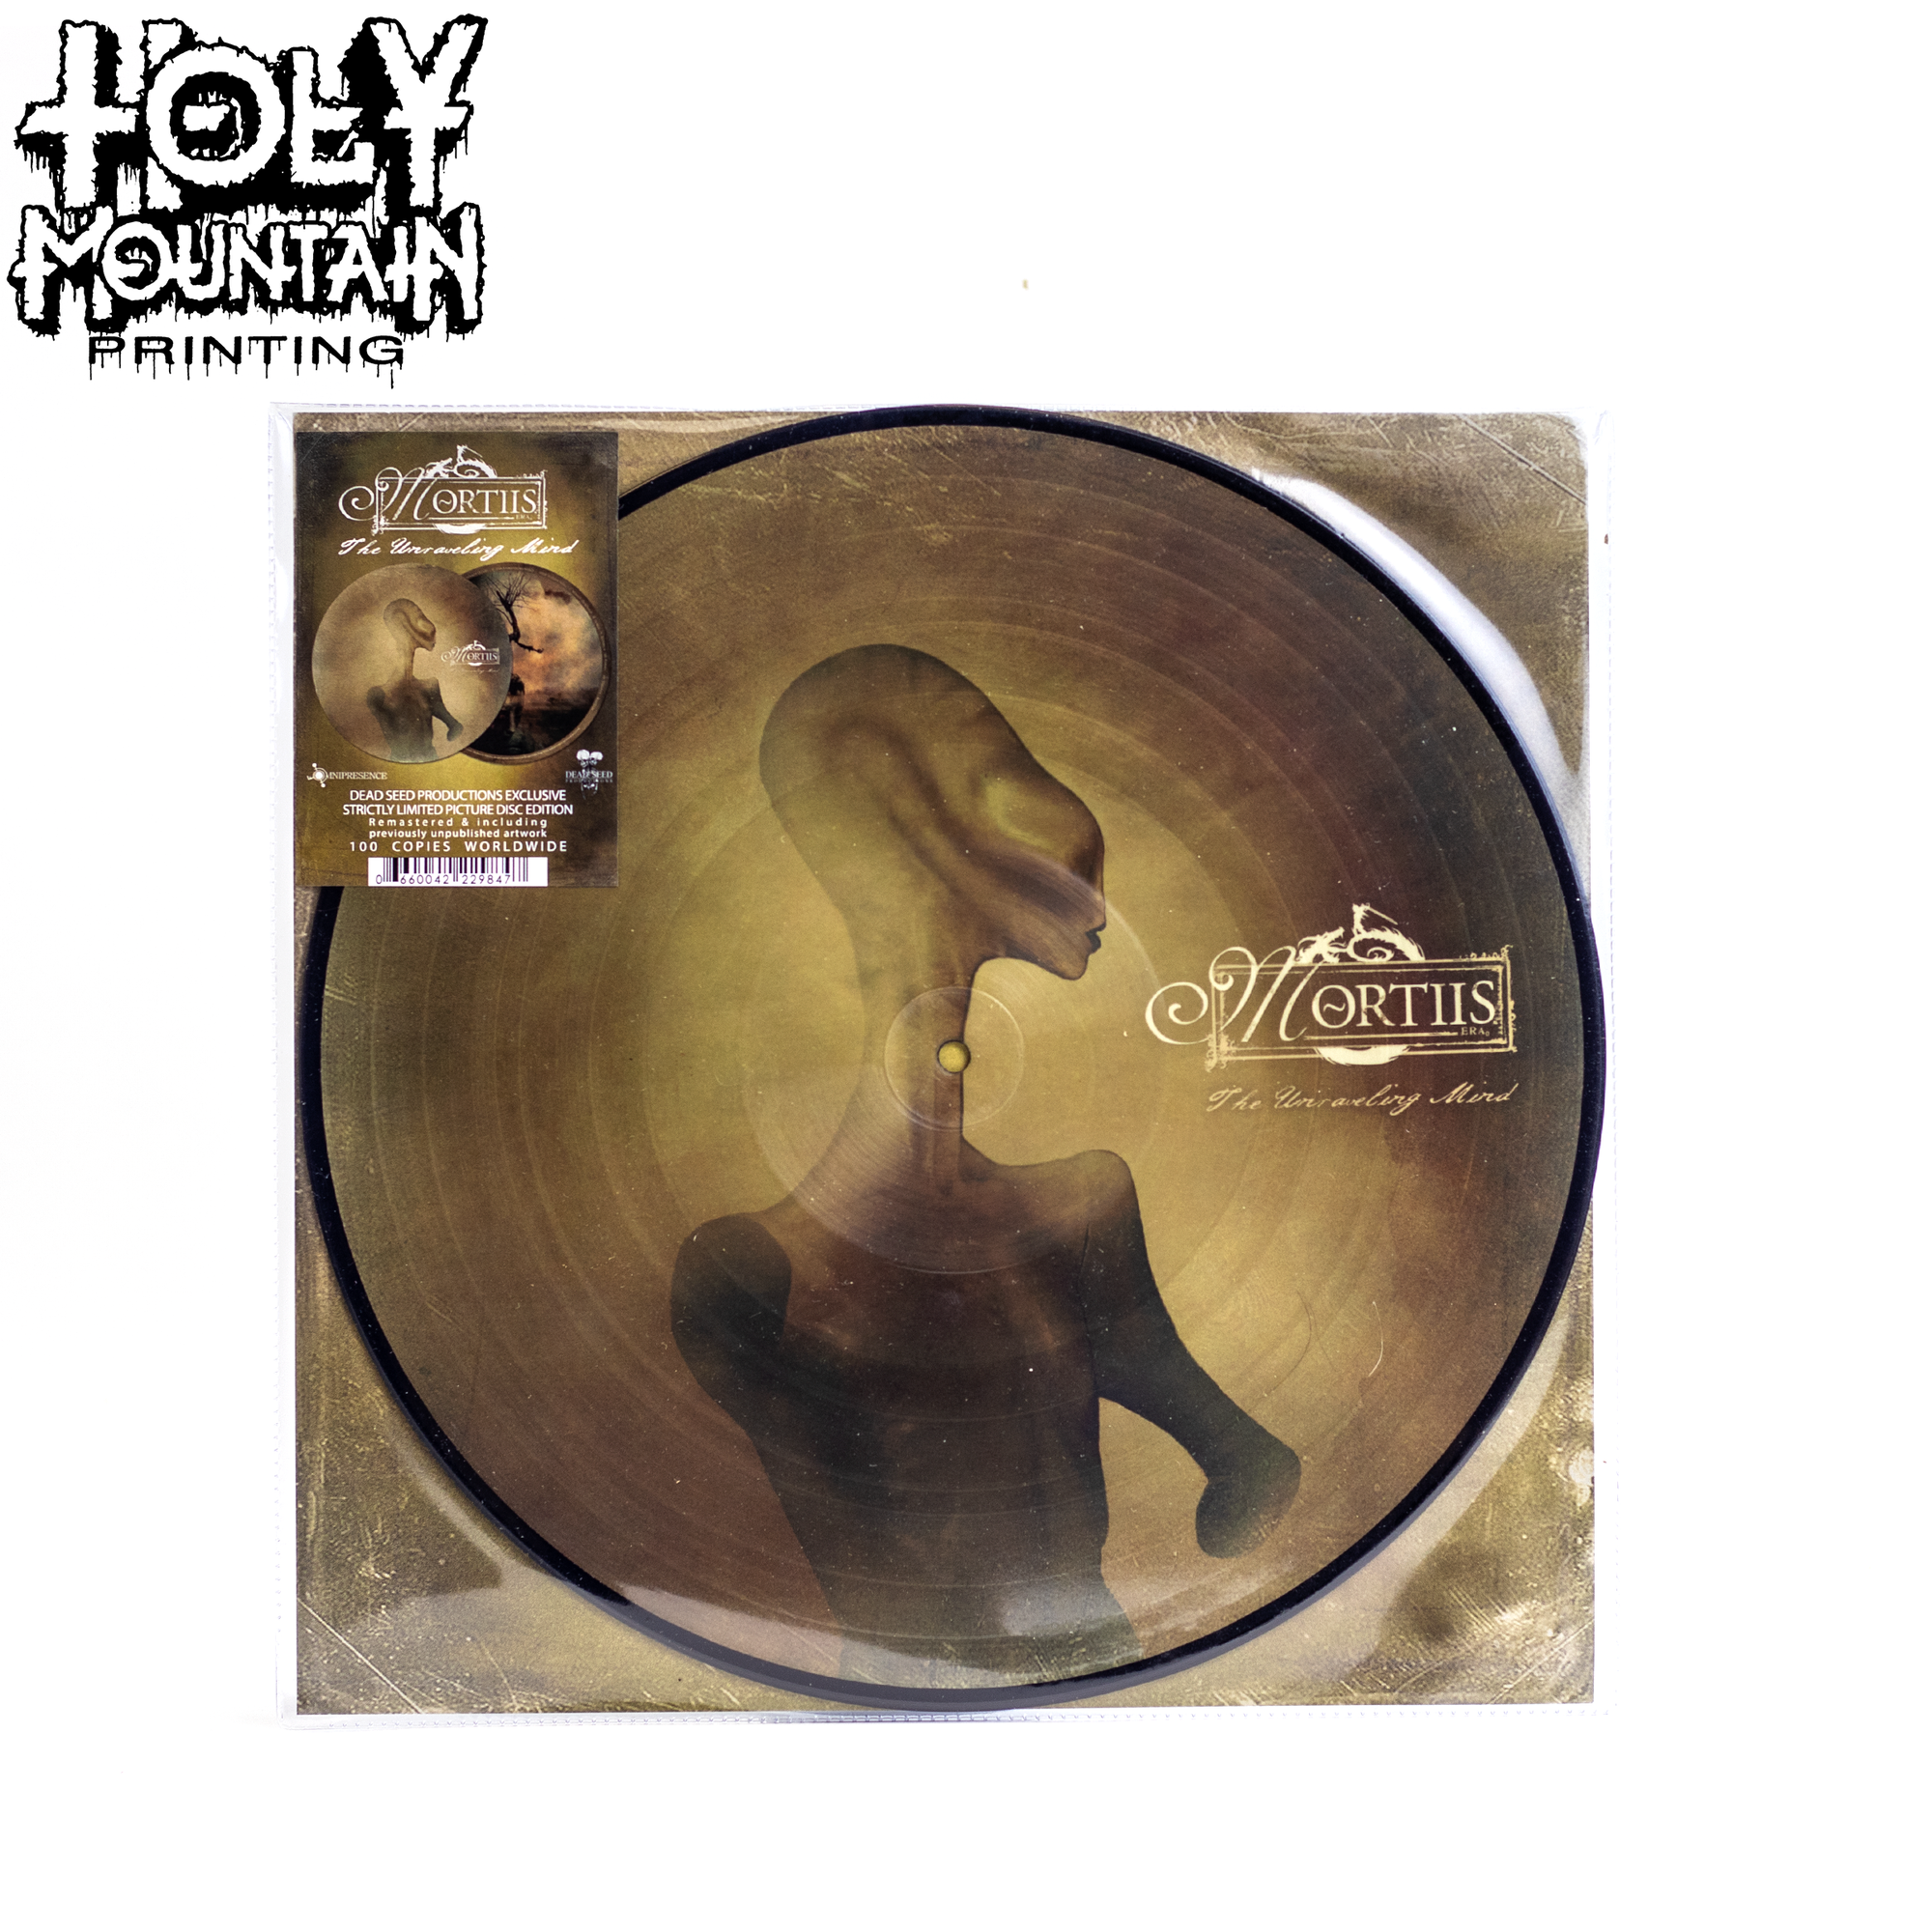 MORTIIS "The Unraveling Mind" Picture Disk Vinyl Record